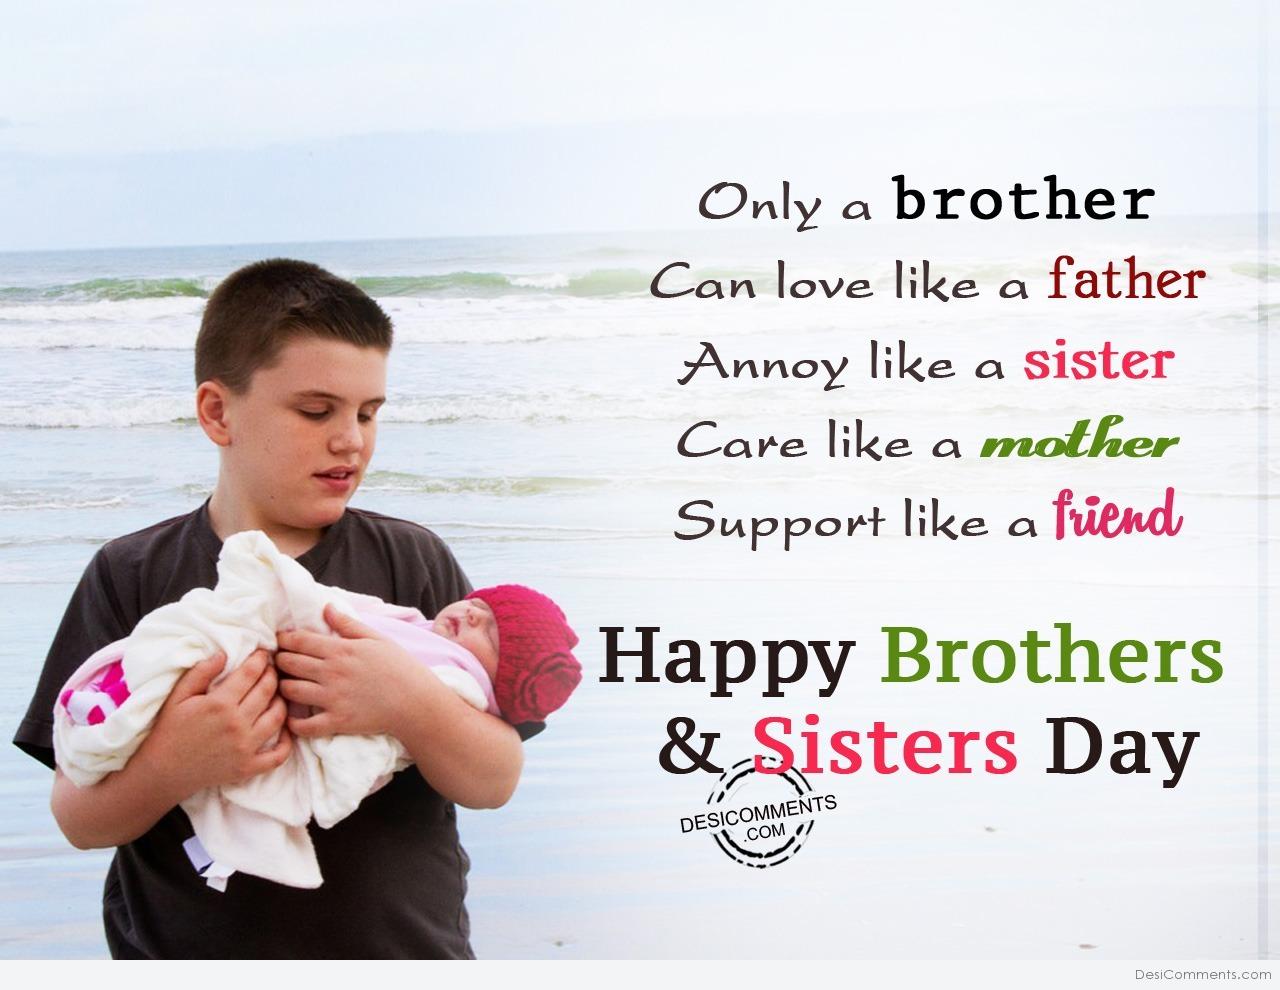 Onlu a brother can love, Happy Brothers & Sisters Day ...